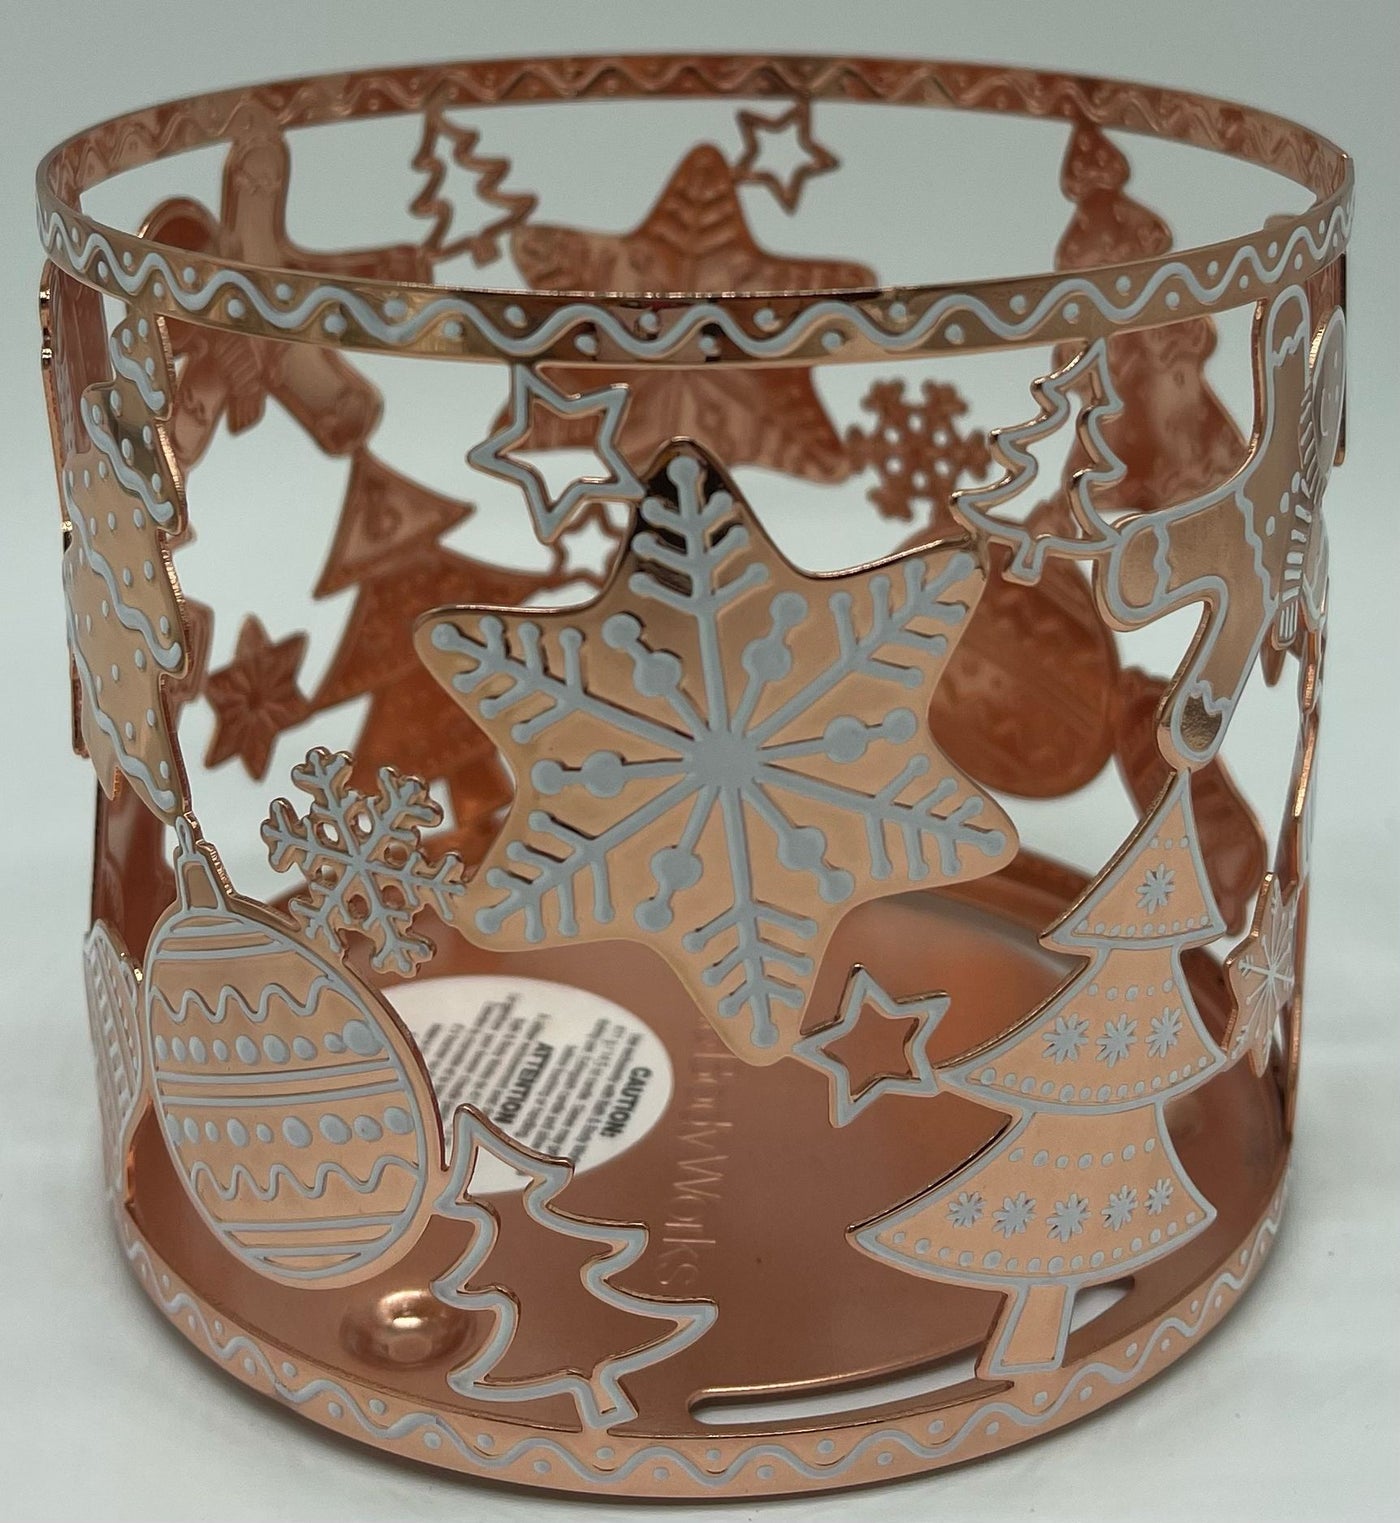 Bath and Body Works 2022 Christmas Gingerbread Ornament 3 Wick Candle Holder New